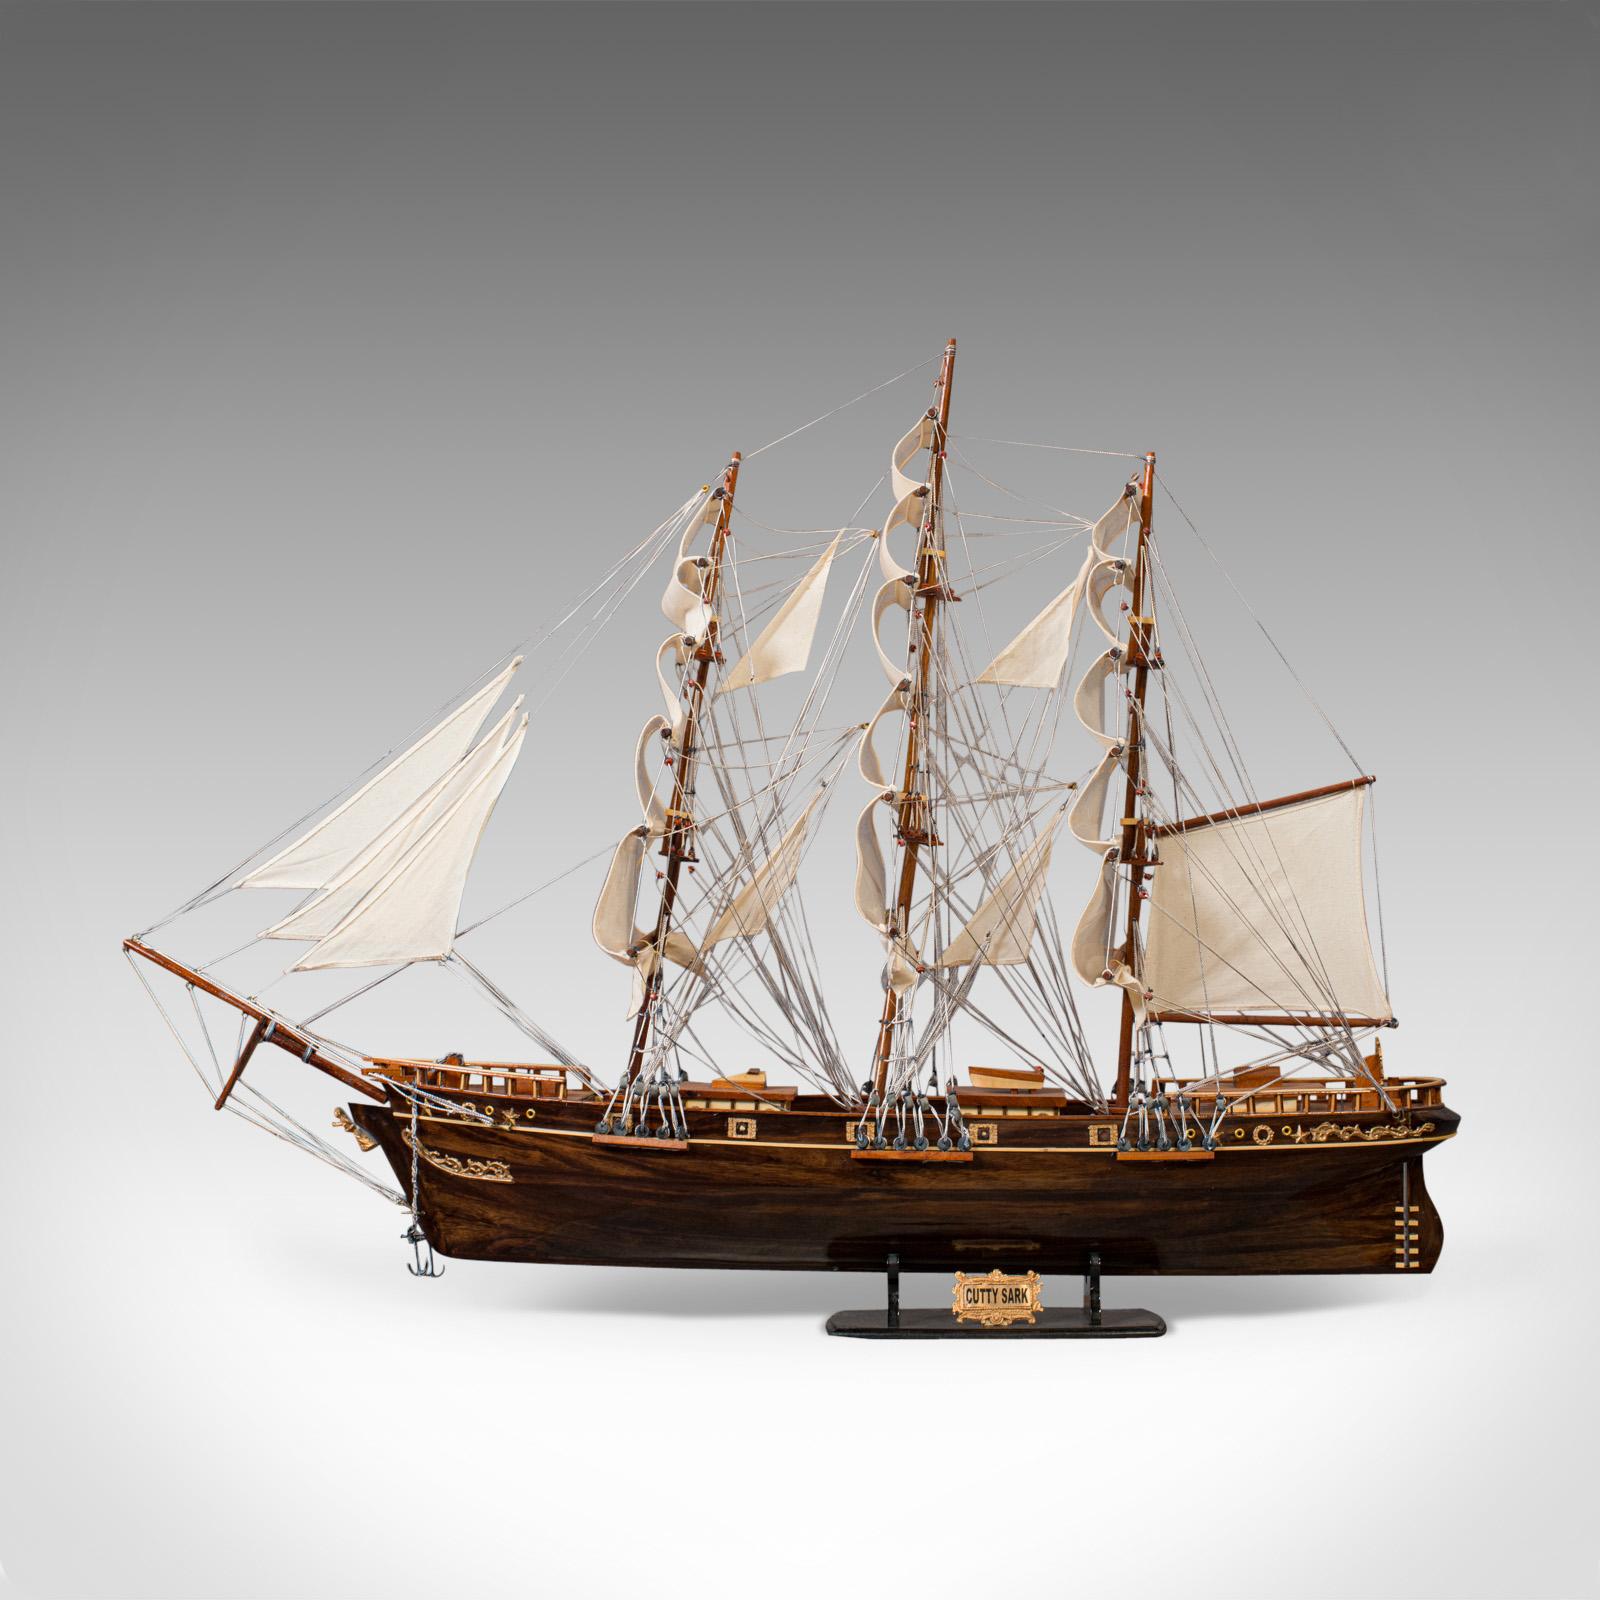 This is a large, vintage model of Cutty Sark. An English, mahogany collectible model ship with display Stand and dating to the 20th century.

Built in Scotland in 1869, the Cutty Sark was one of the last tea clippers, whilst being one of the